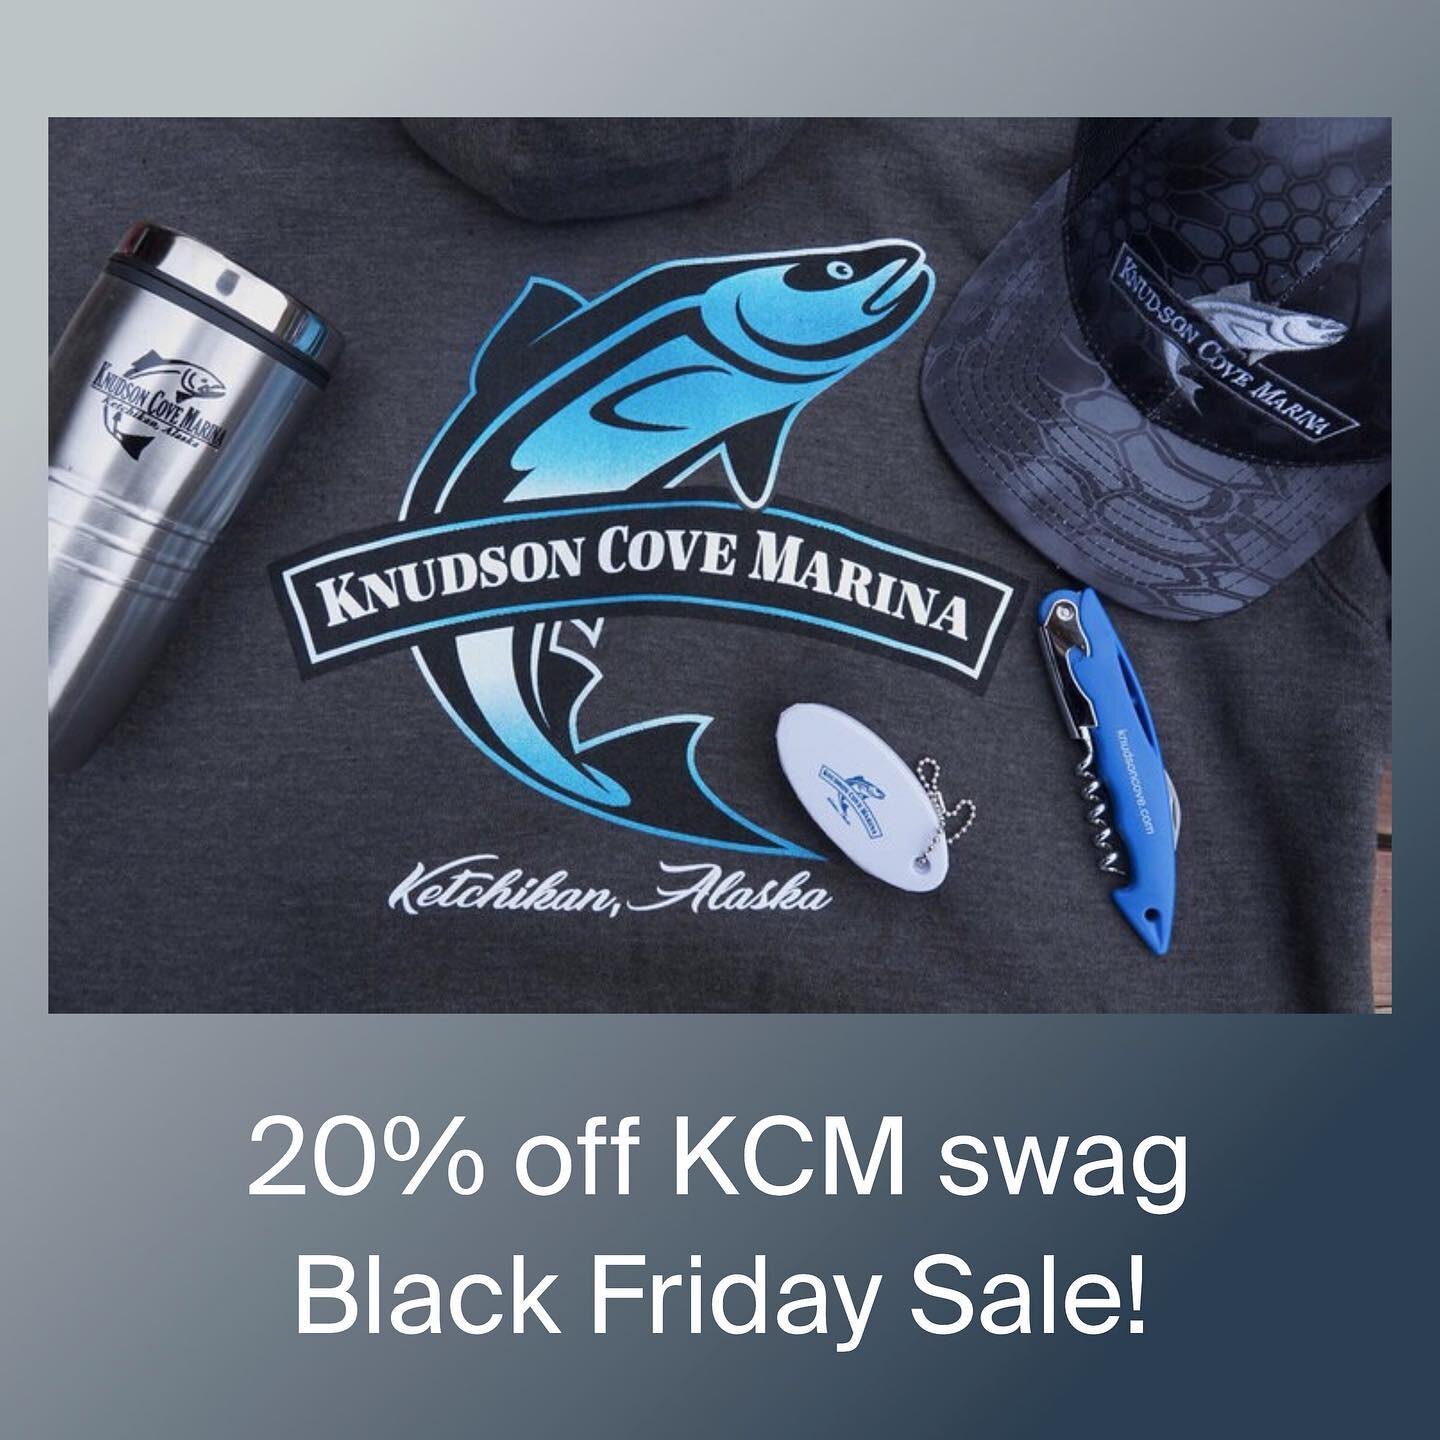 Black friday only! Online you can use the code SALE20 at checkout to save on your KCM gear. Link to our website is in the bio. OR come in person to shop at the marina store today 👍🐟
-
-
#knudsoncovemarina #ketchikan #alaska